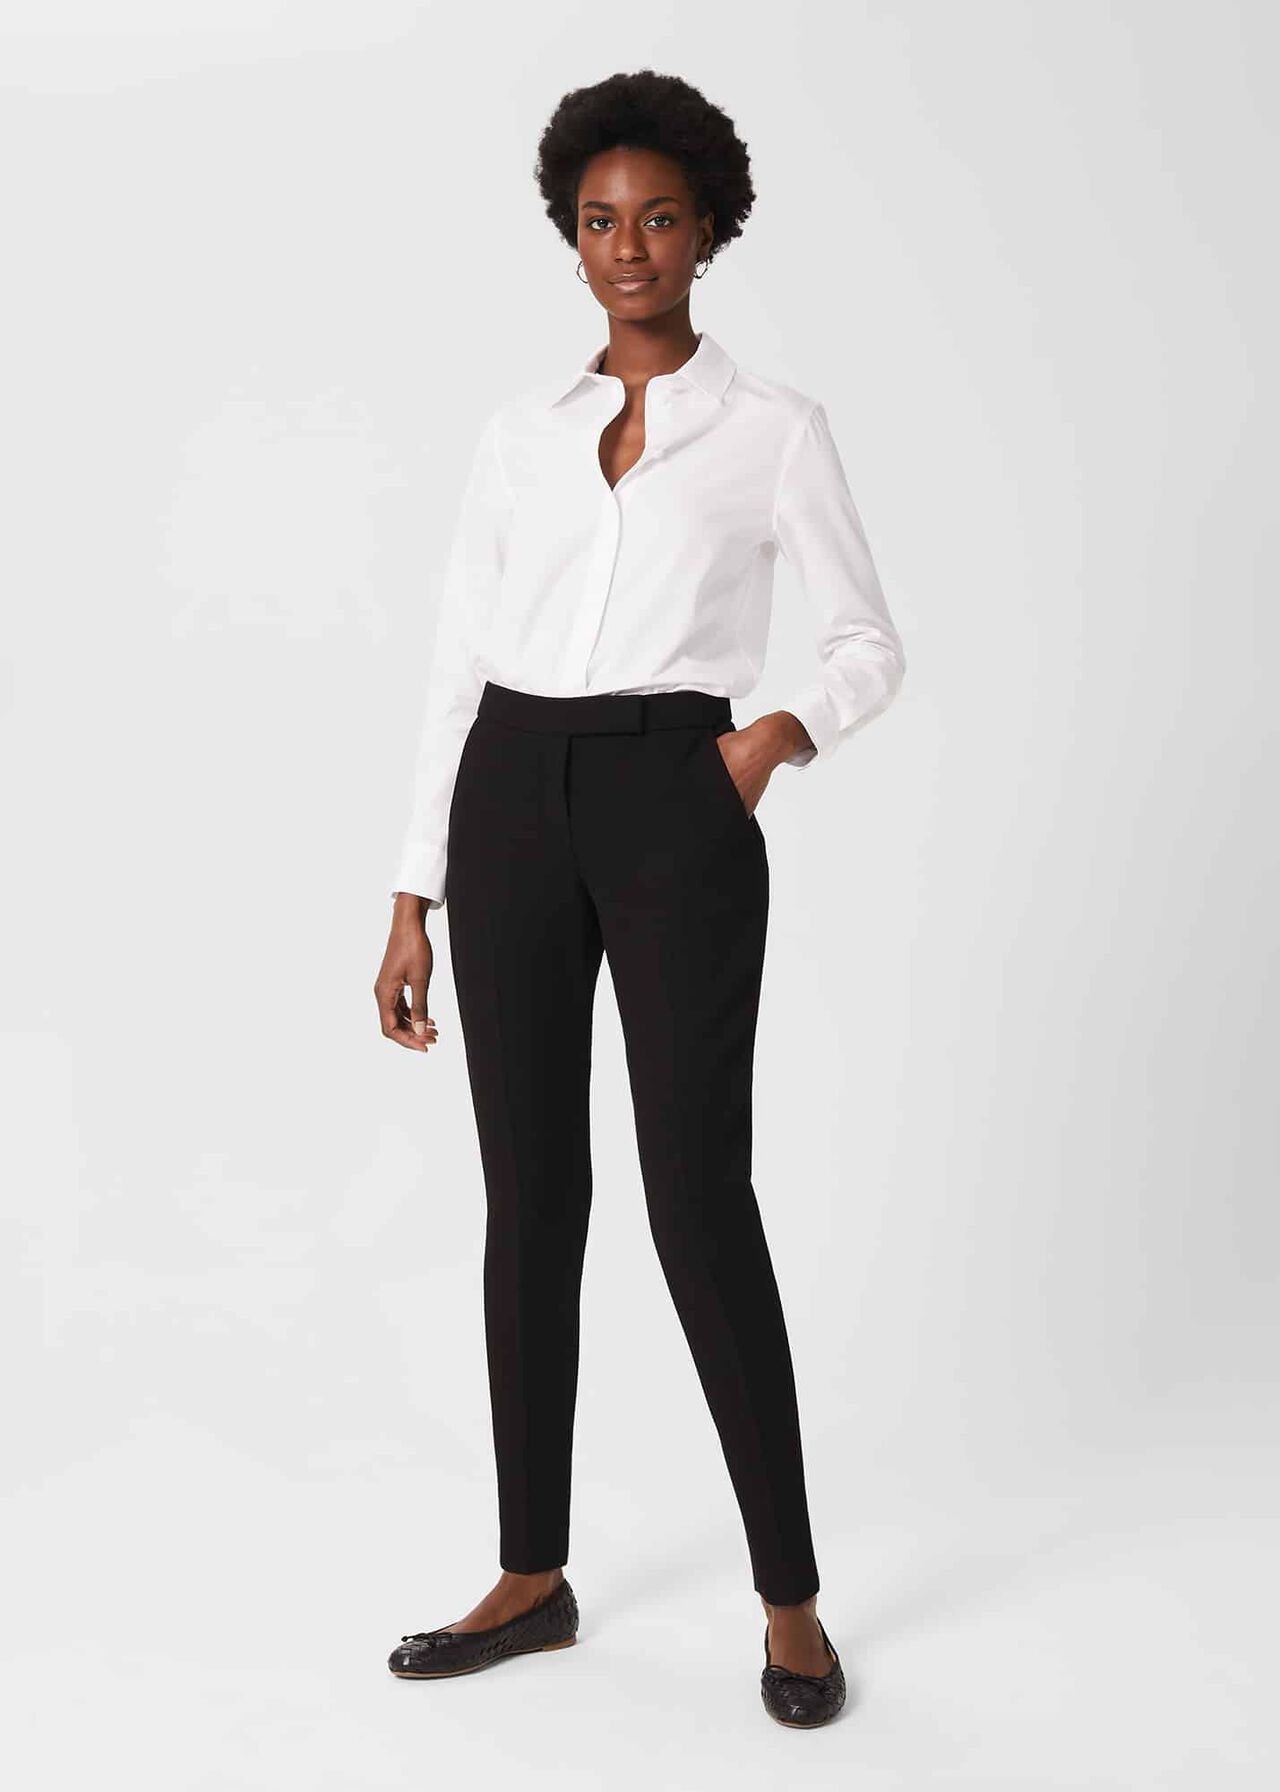 Ophelia Slim Trousers With Stretch, Black, hi-res